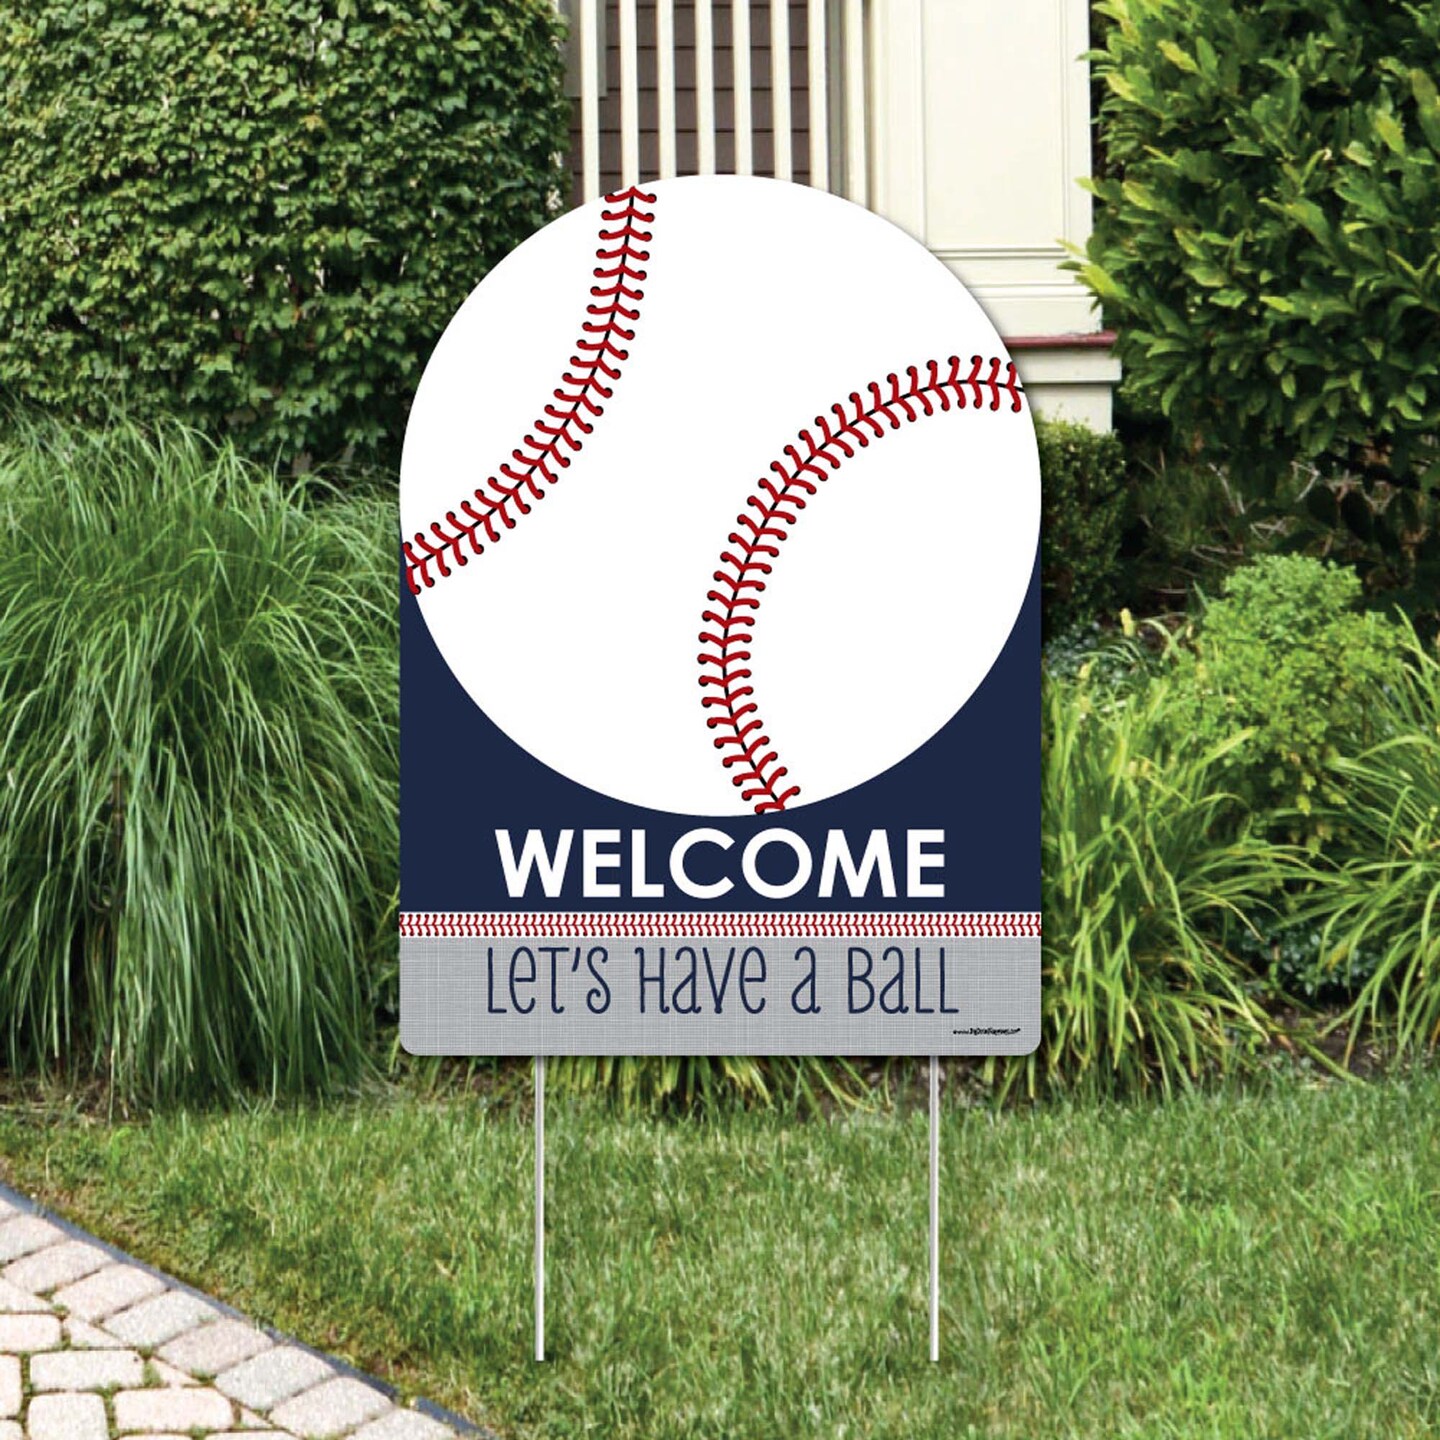 Big Dot of Happiness Batter Up - Baseball - Party Decorations - Birthday Party or Baby Shower Welcome Yard Sign